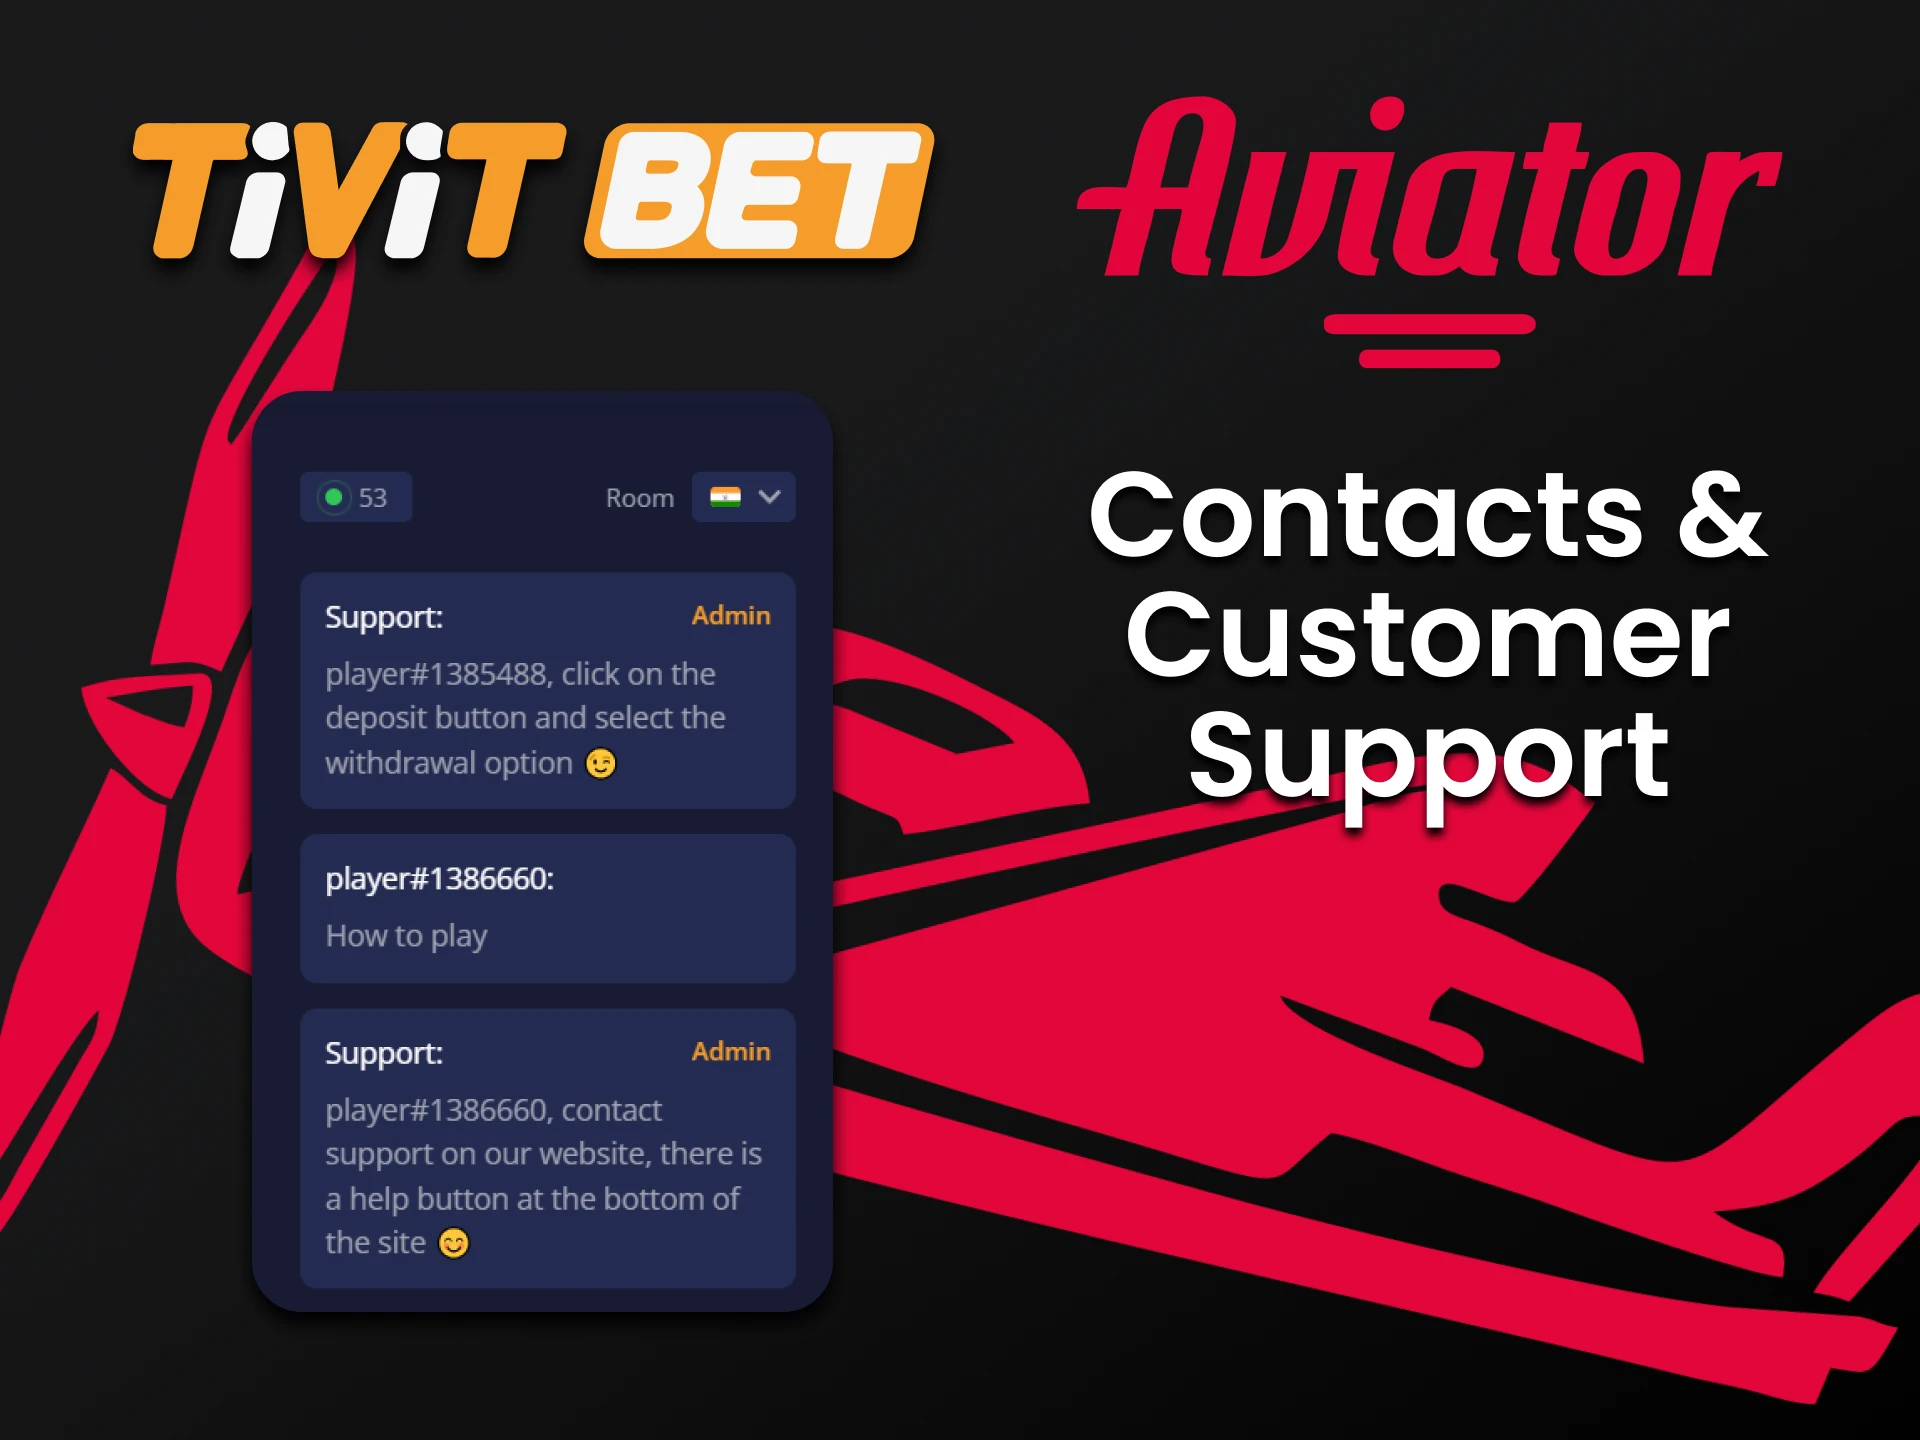 You can ask questions about playing Aviator in the chat on Tivitbet.